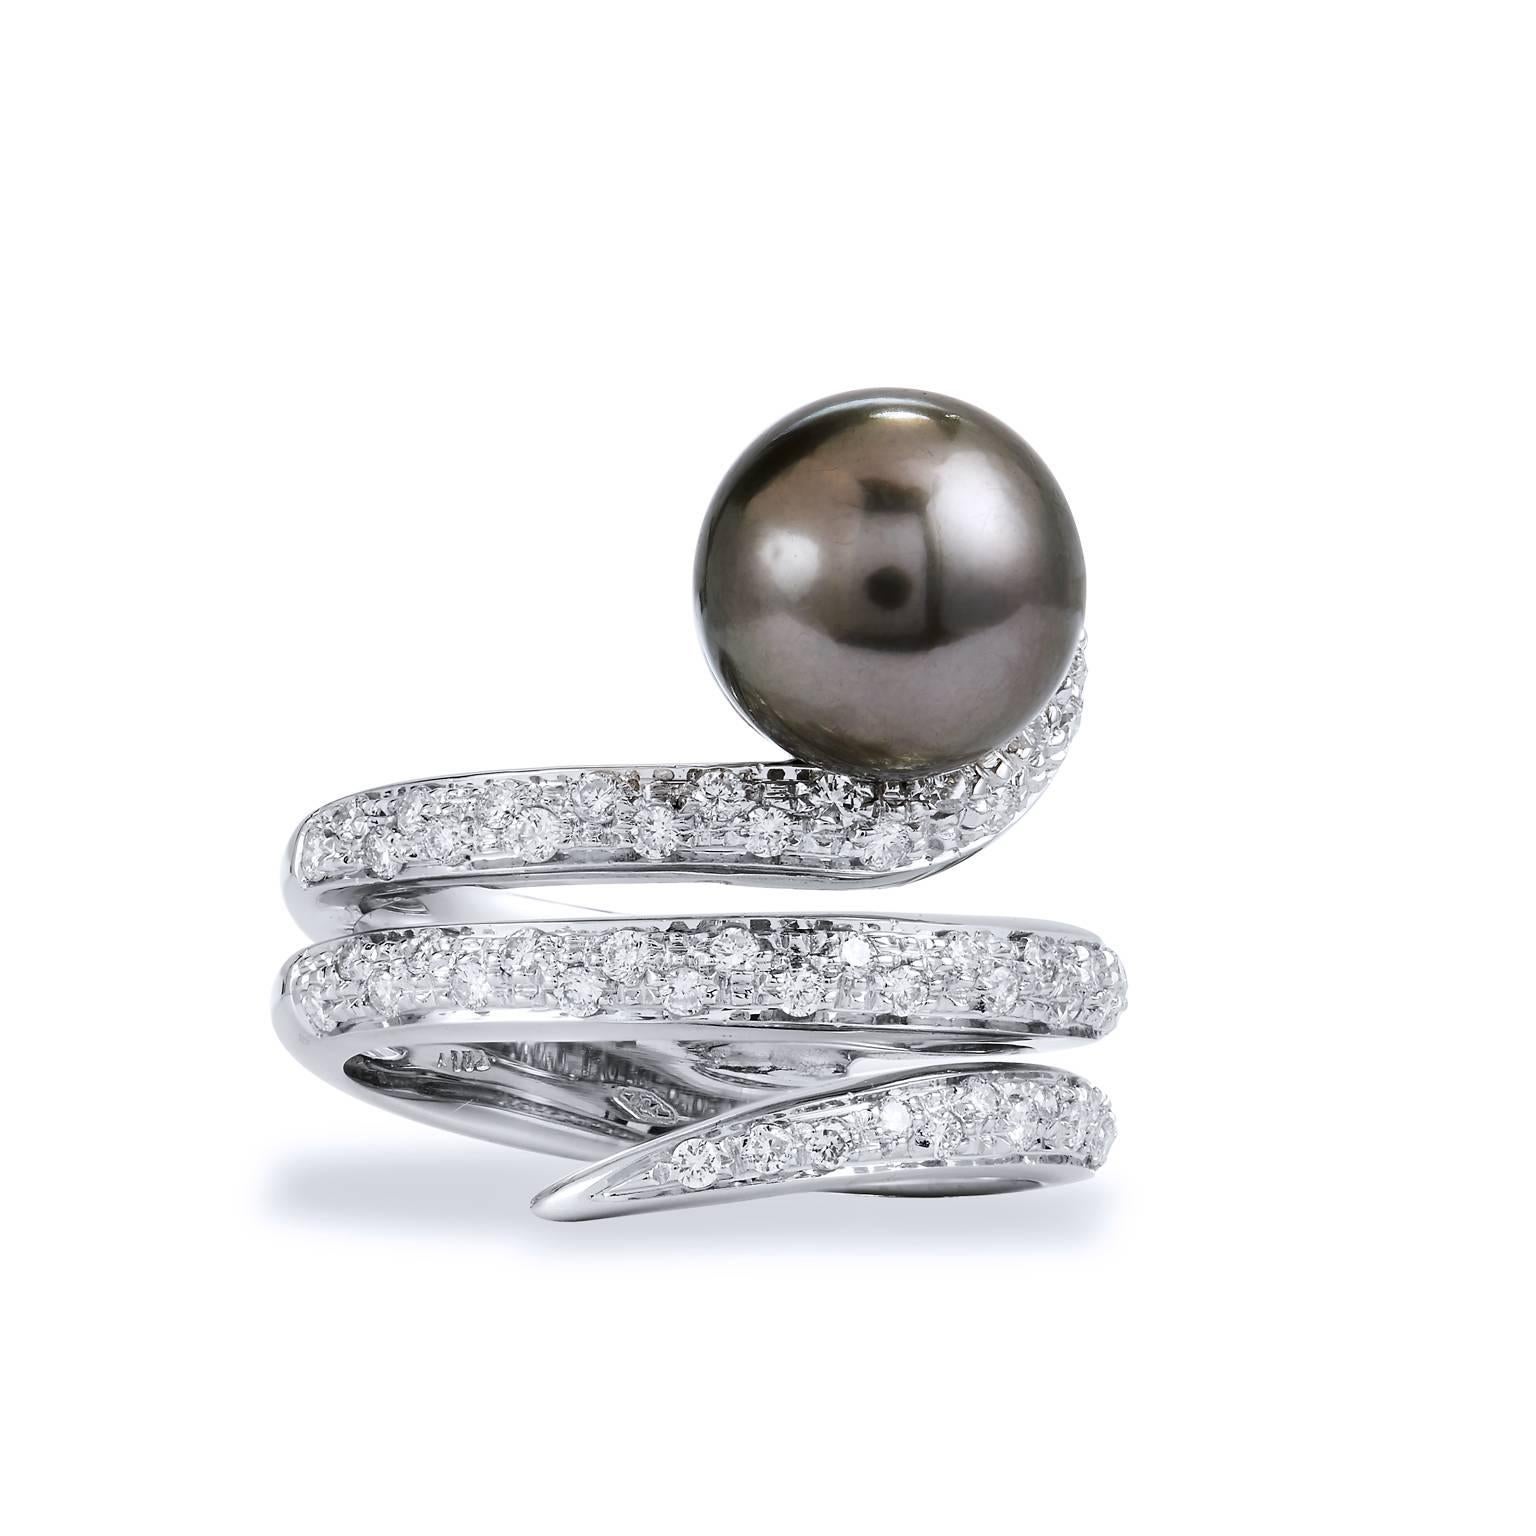 Spiral Tahitian Pearl and Diamond Pave 18 karat White Gold Ring Size 7

A truly unique design, this Italian diamond and pearl ring wraps the finger in .48ct of F/G VS2/SI1 diamond pave. 
At the pinnacle sits a gorgeous 9.80 mm Tahitian pearl. The